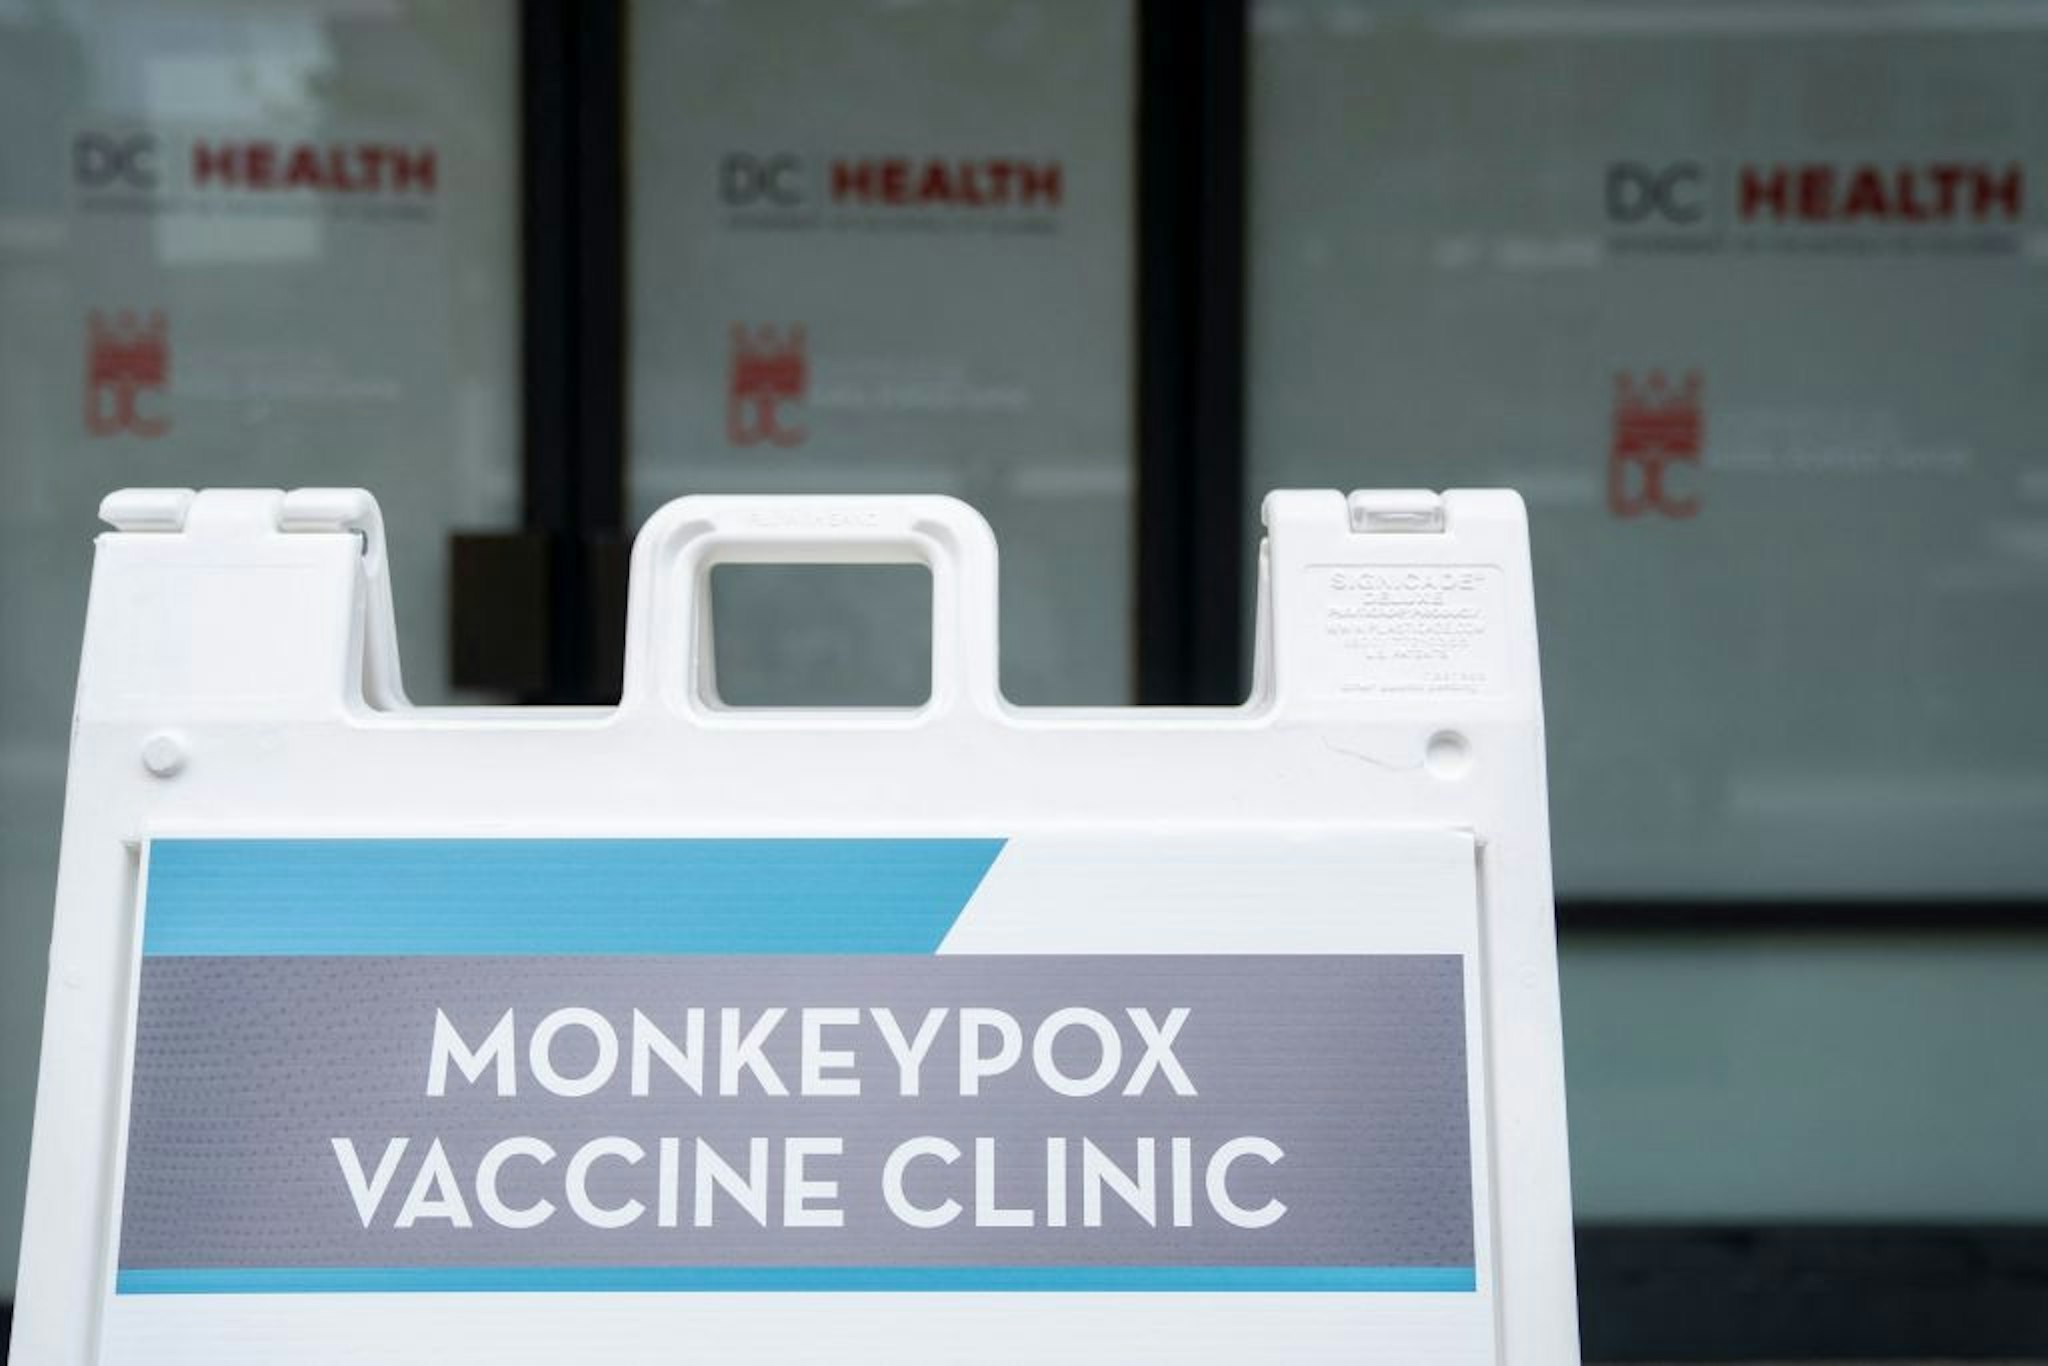 This photo taken on August 5, 2022 shows a sign for a Monkeypox vaccine clinic in Washington, DC. - US President Joe Biden's government on August 4 declared monkeypox a public health emergency, a move that should free up new funds, assist in data gathering and allow the deployment of additional personnel in the fight against the disease. (Photo by Stefani Reynolds / AFP) (Photo by STEFANI REYNOLDS/AFP via Getty Images)